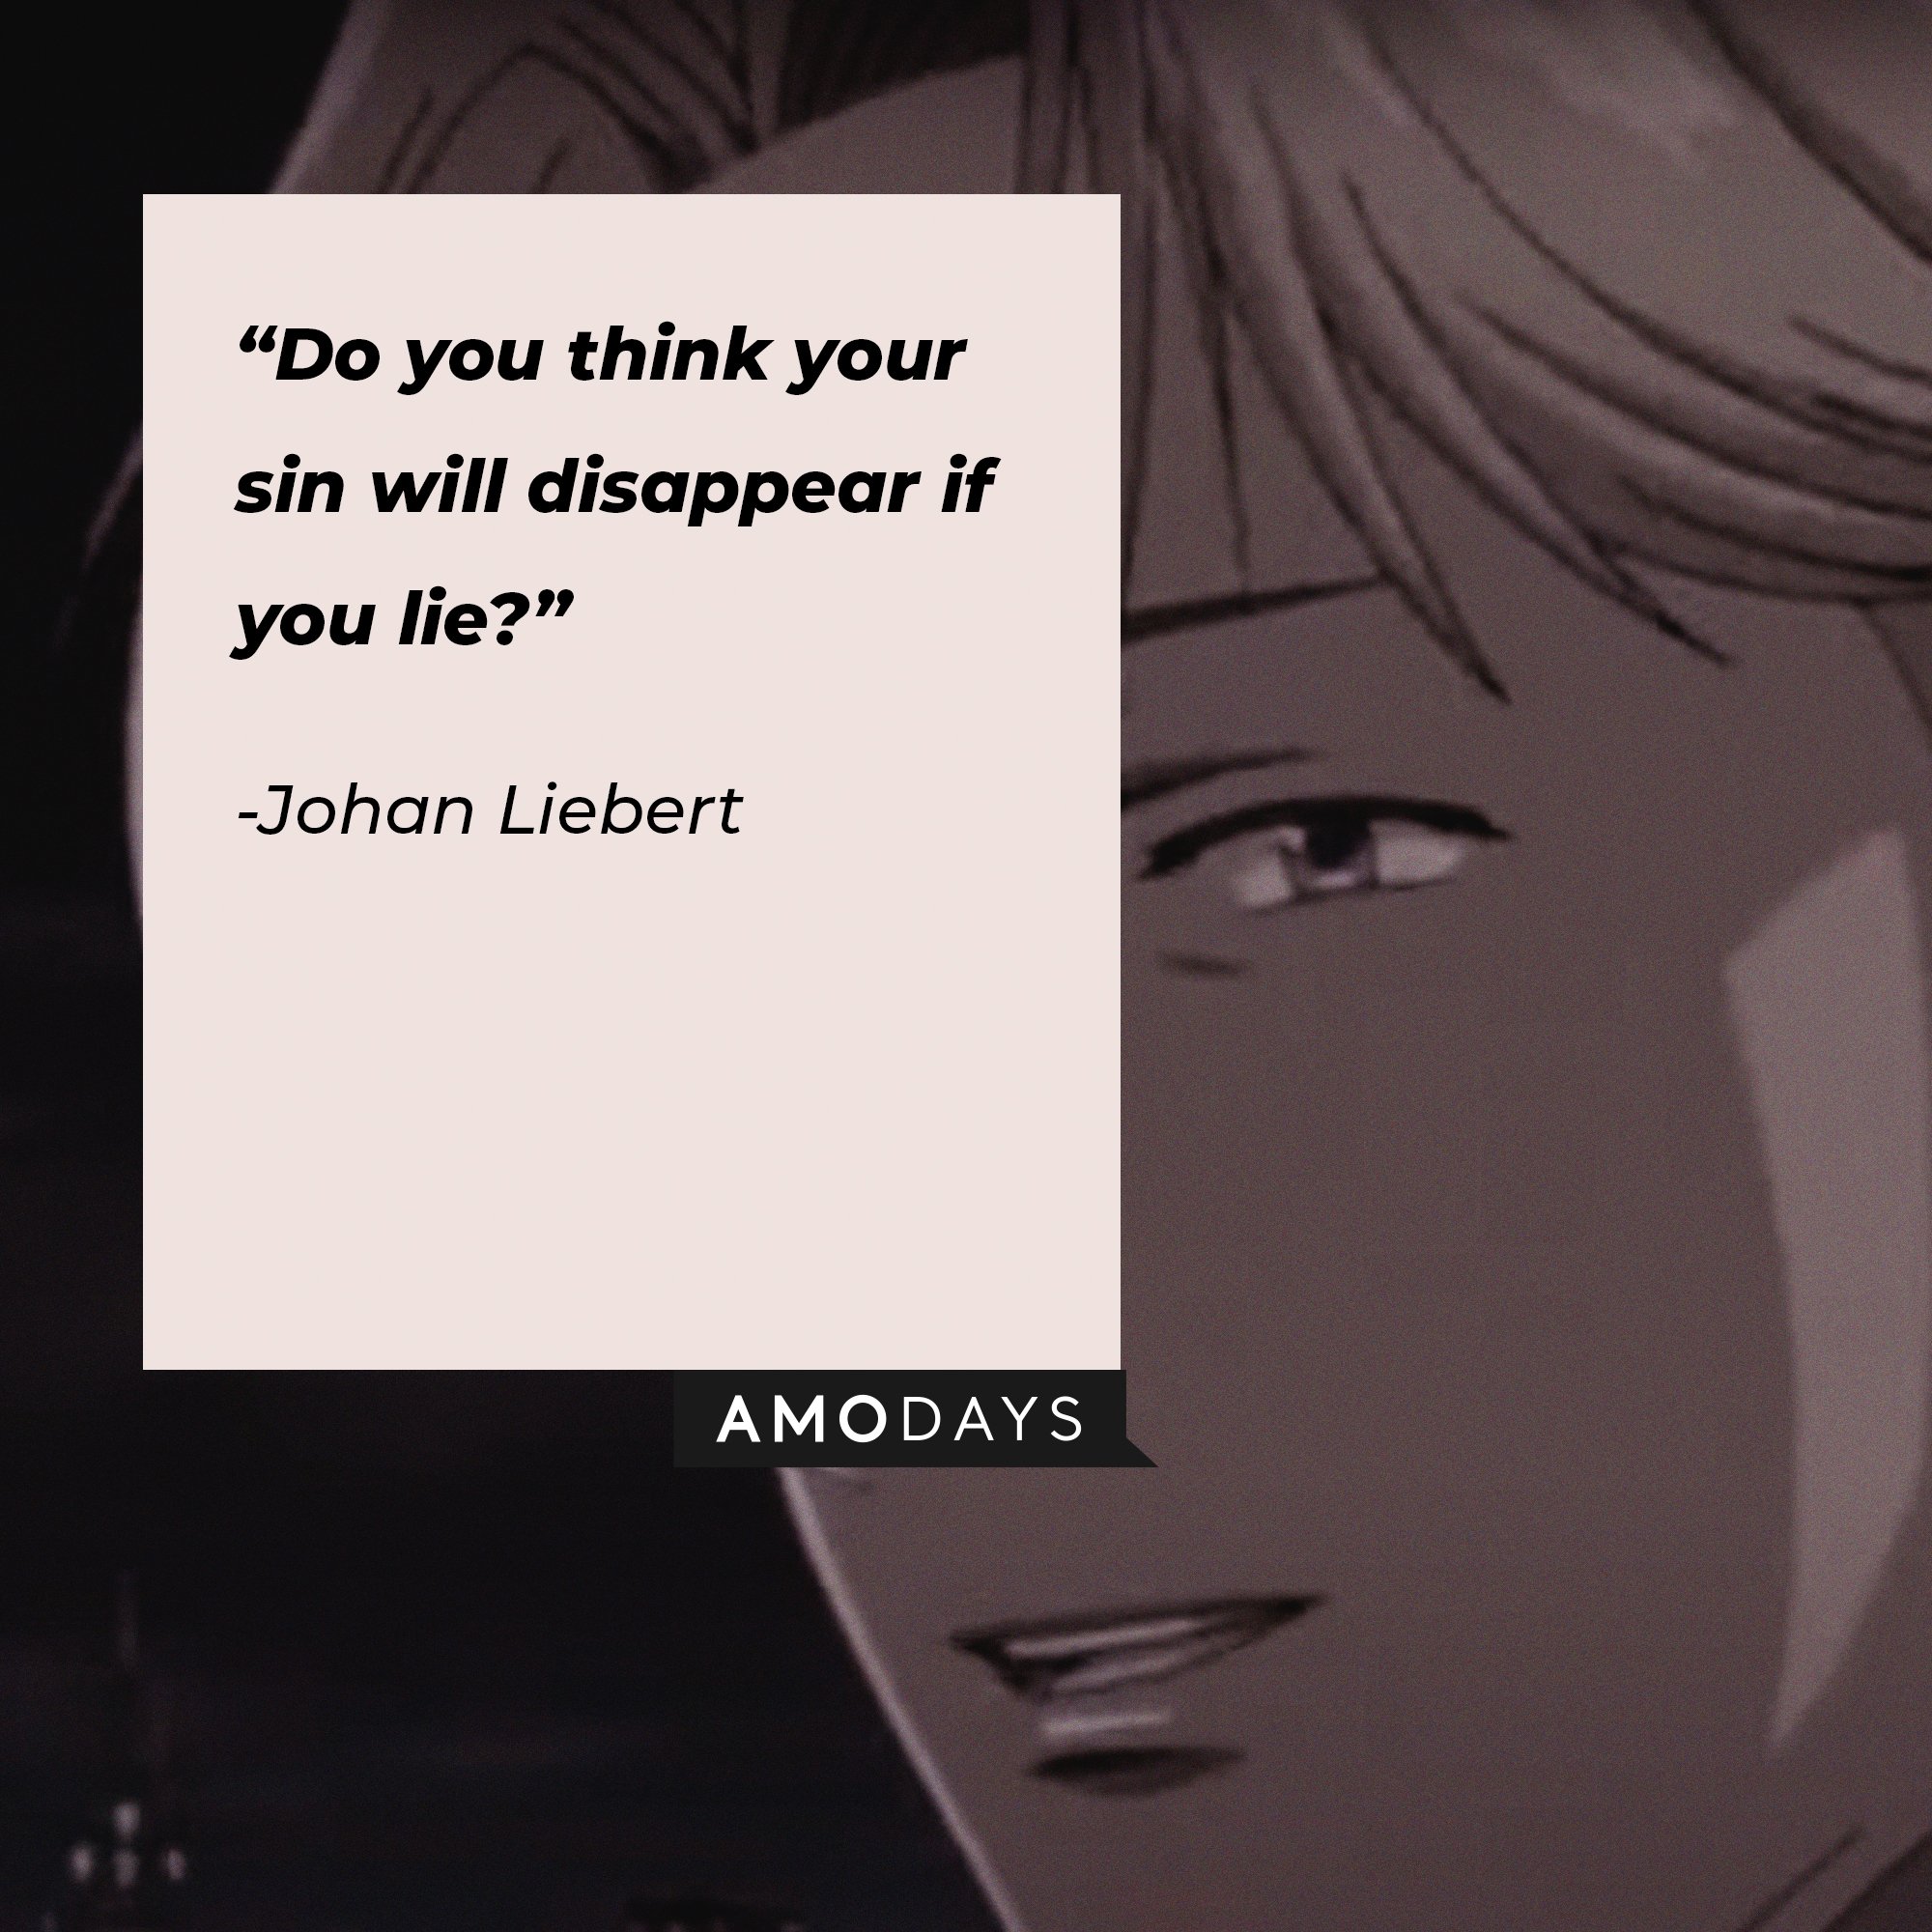 Johan Liebert’s quote: “Do you think your sin will disappear if you lie?” | Image: AmoDays